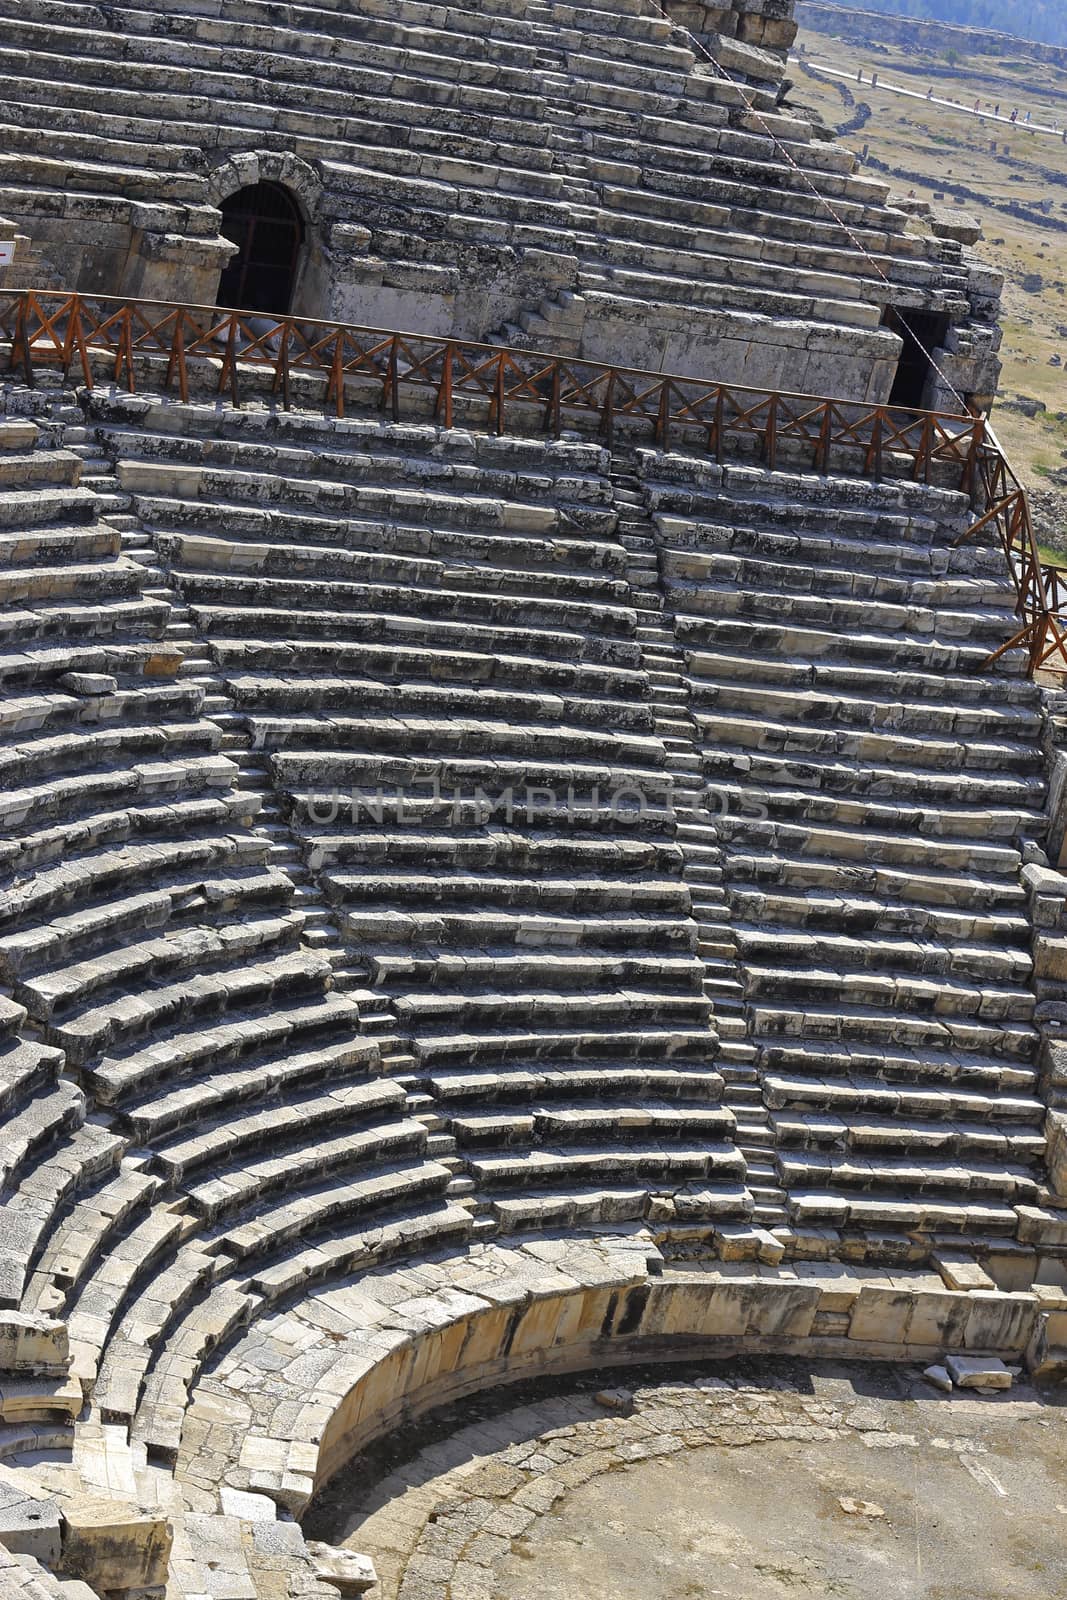 Ruins of theater in ancient town Hierapolis Turkey by scullery